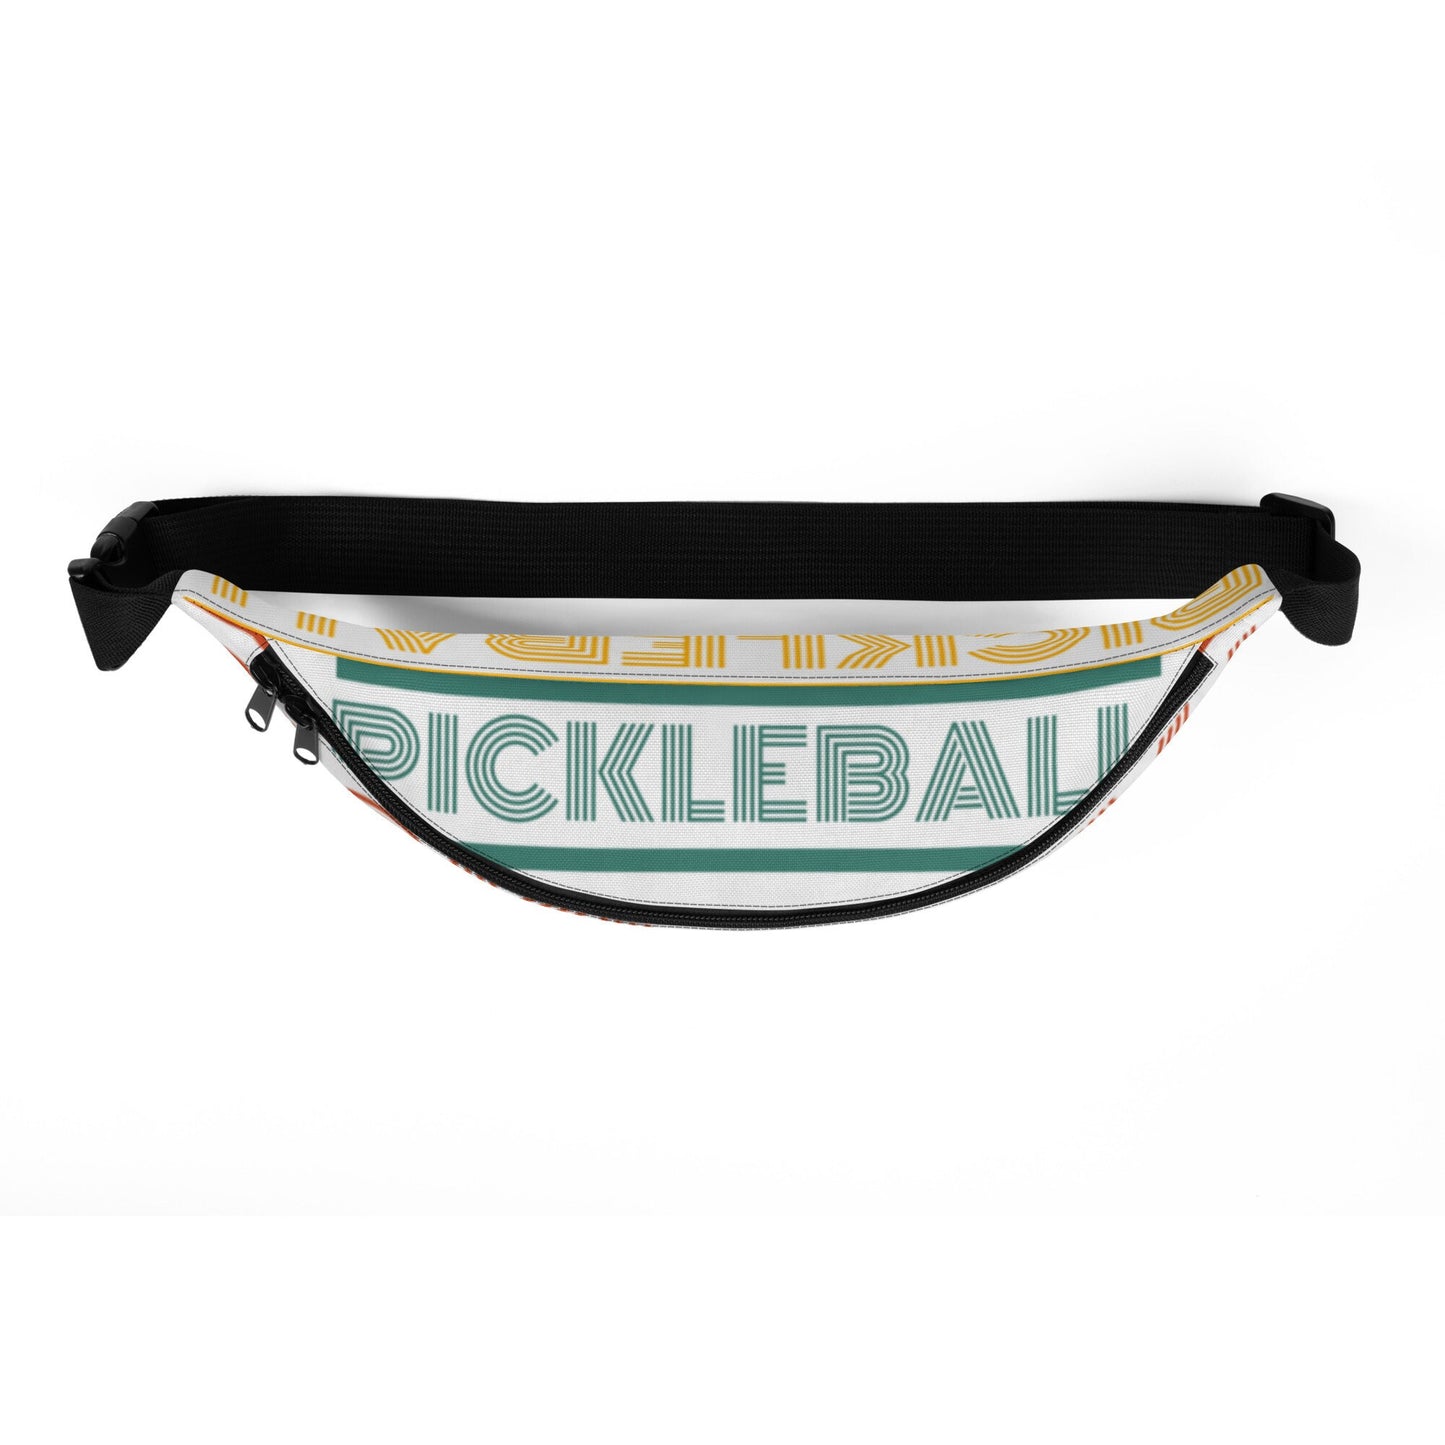 Fanny Pack, Pickleball Fanny Pack, Pickleball Bag, Sports Fanny Pack, Cross Body Bag, Pickleball Player, Pickleball Gifts